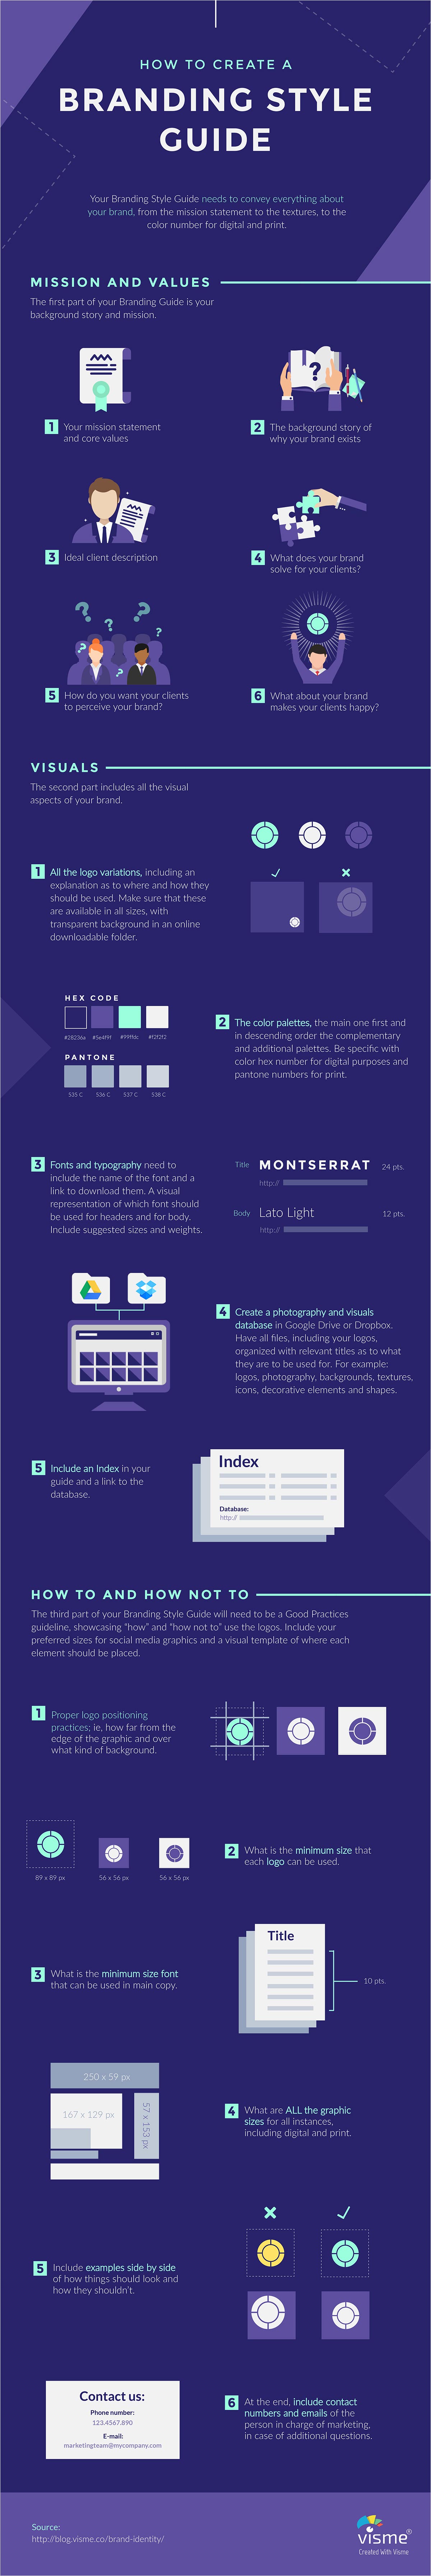 Branding Style Guide [Infographic]